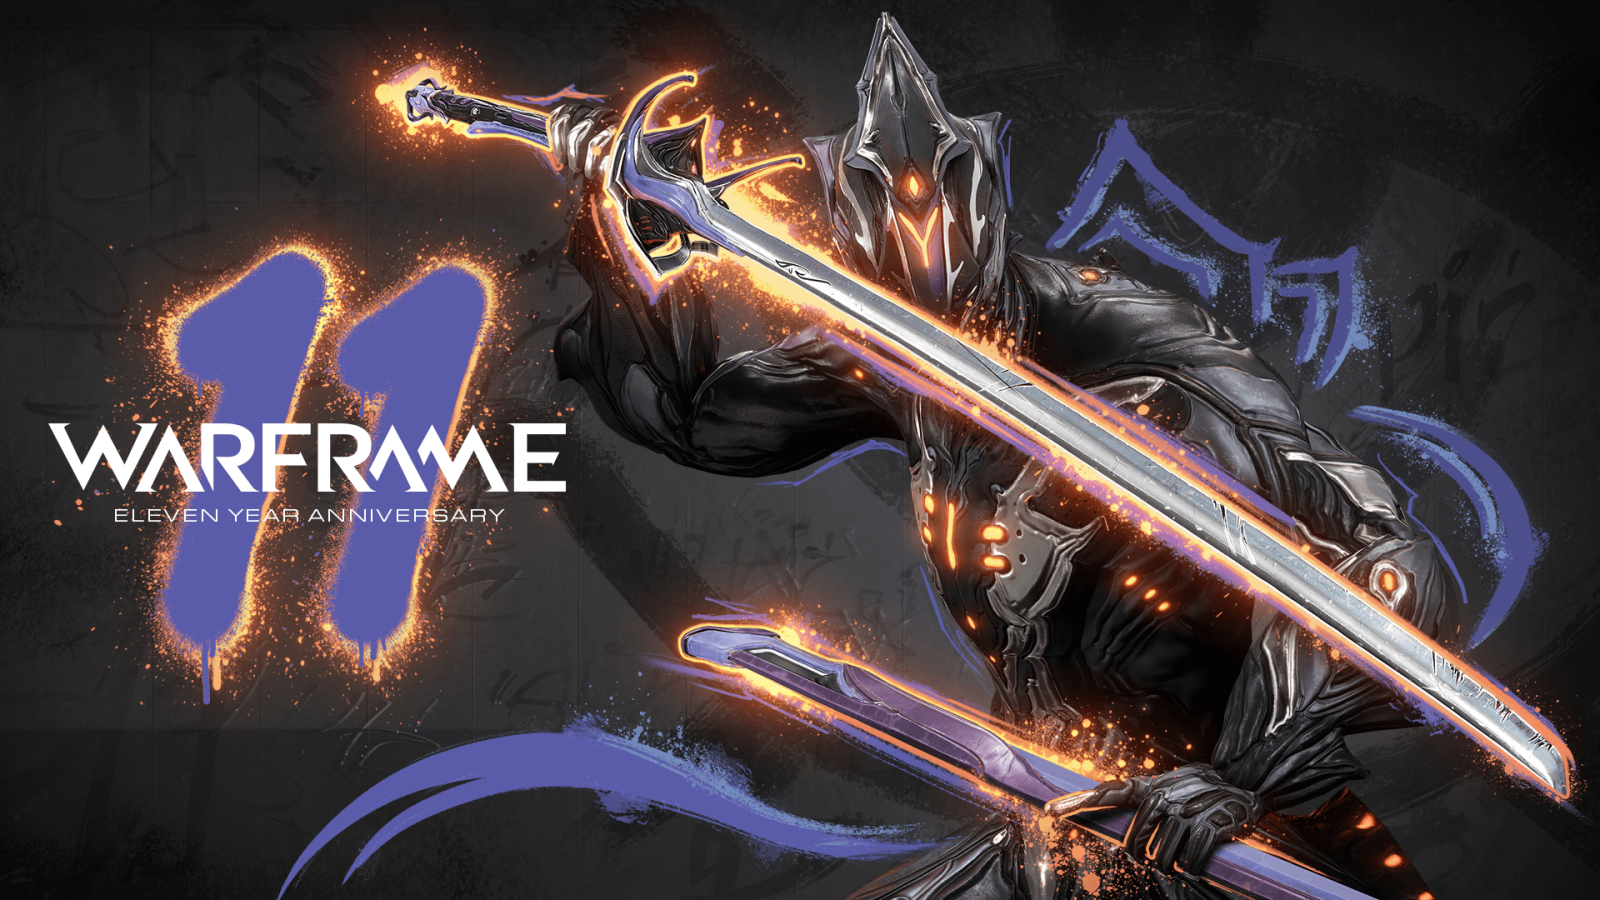 Warframe Marks its 11th Anniversary with Special Events and Exclusive Rewards